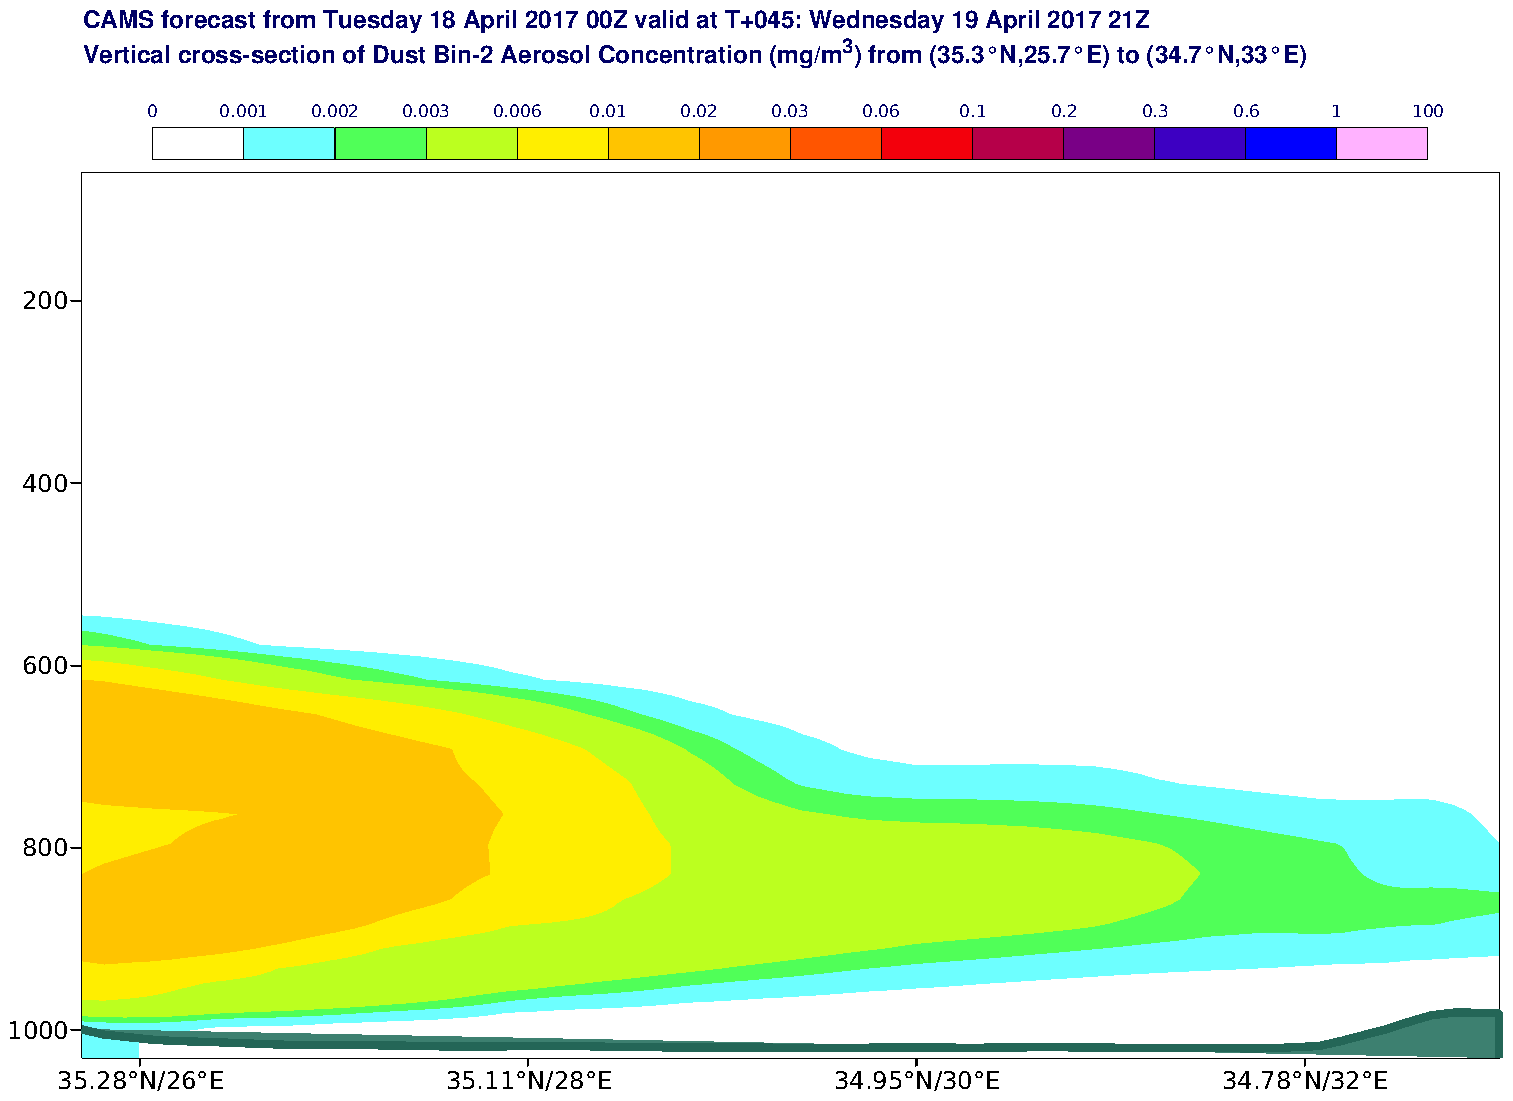 Vertical cross-section of Dust Bin-2 Aerosol Concentration (mg/m3) valid at T45 - 2017-04-19 21:00